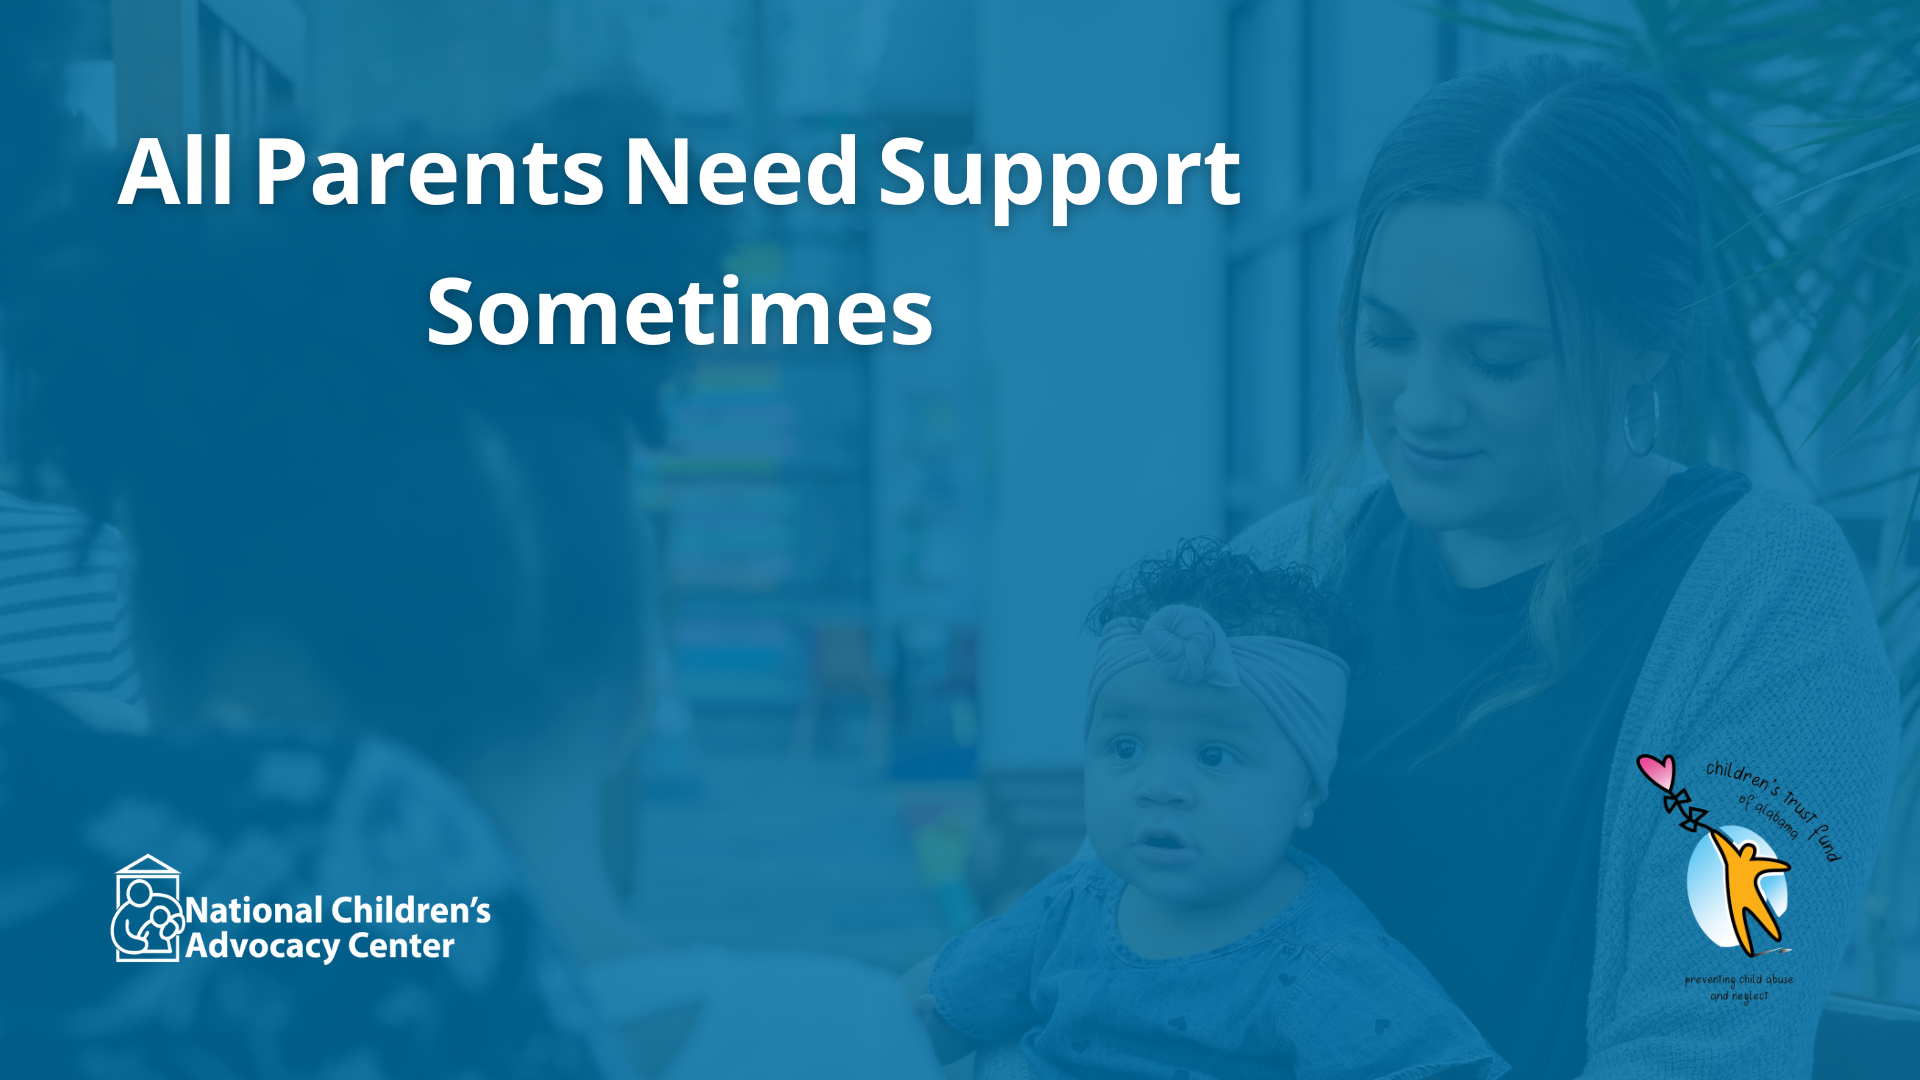 All Parents Need Support